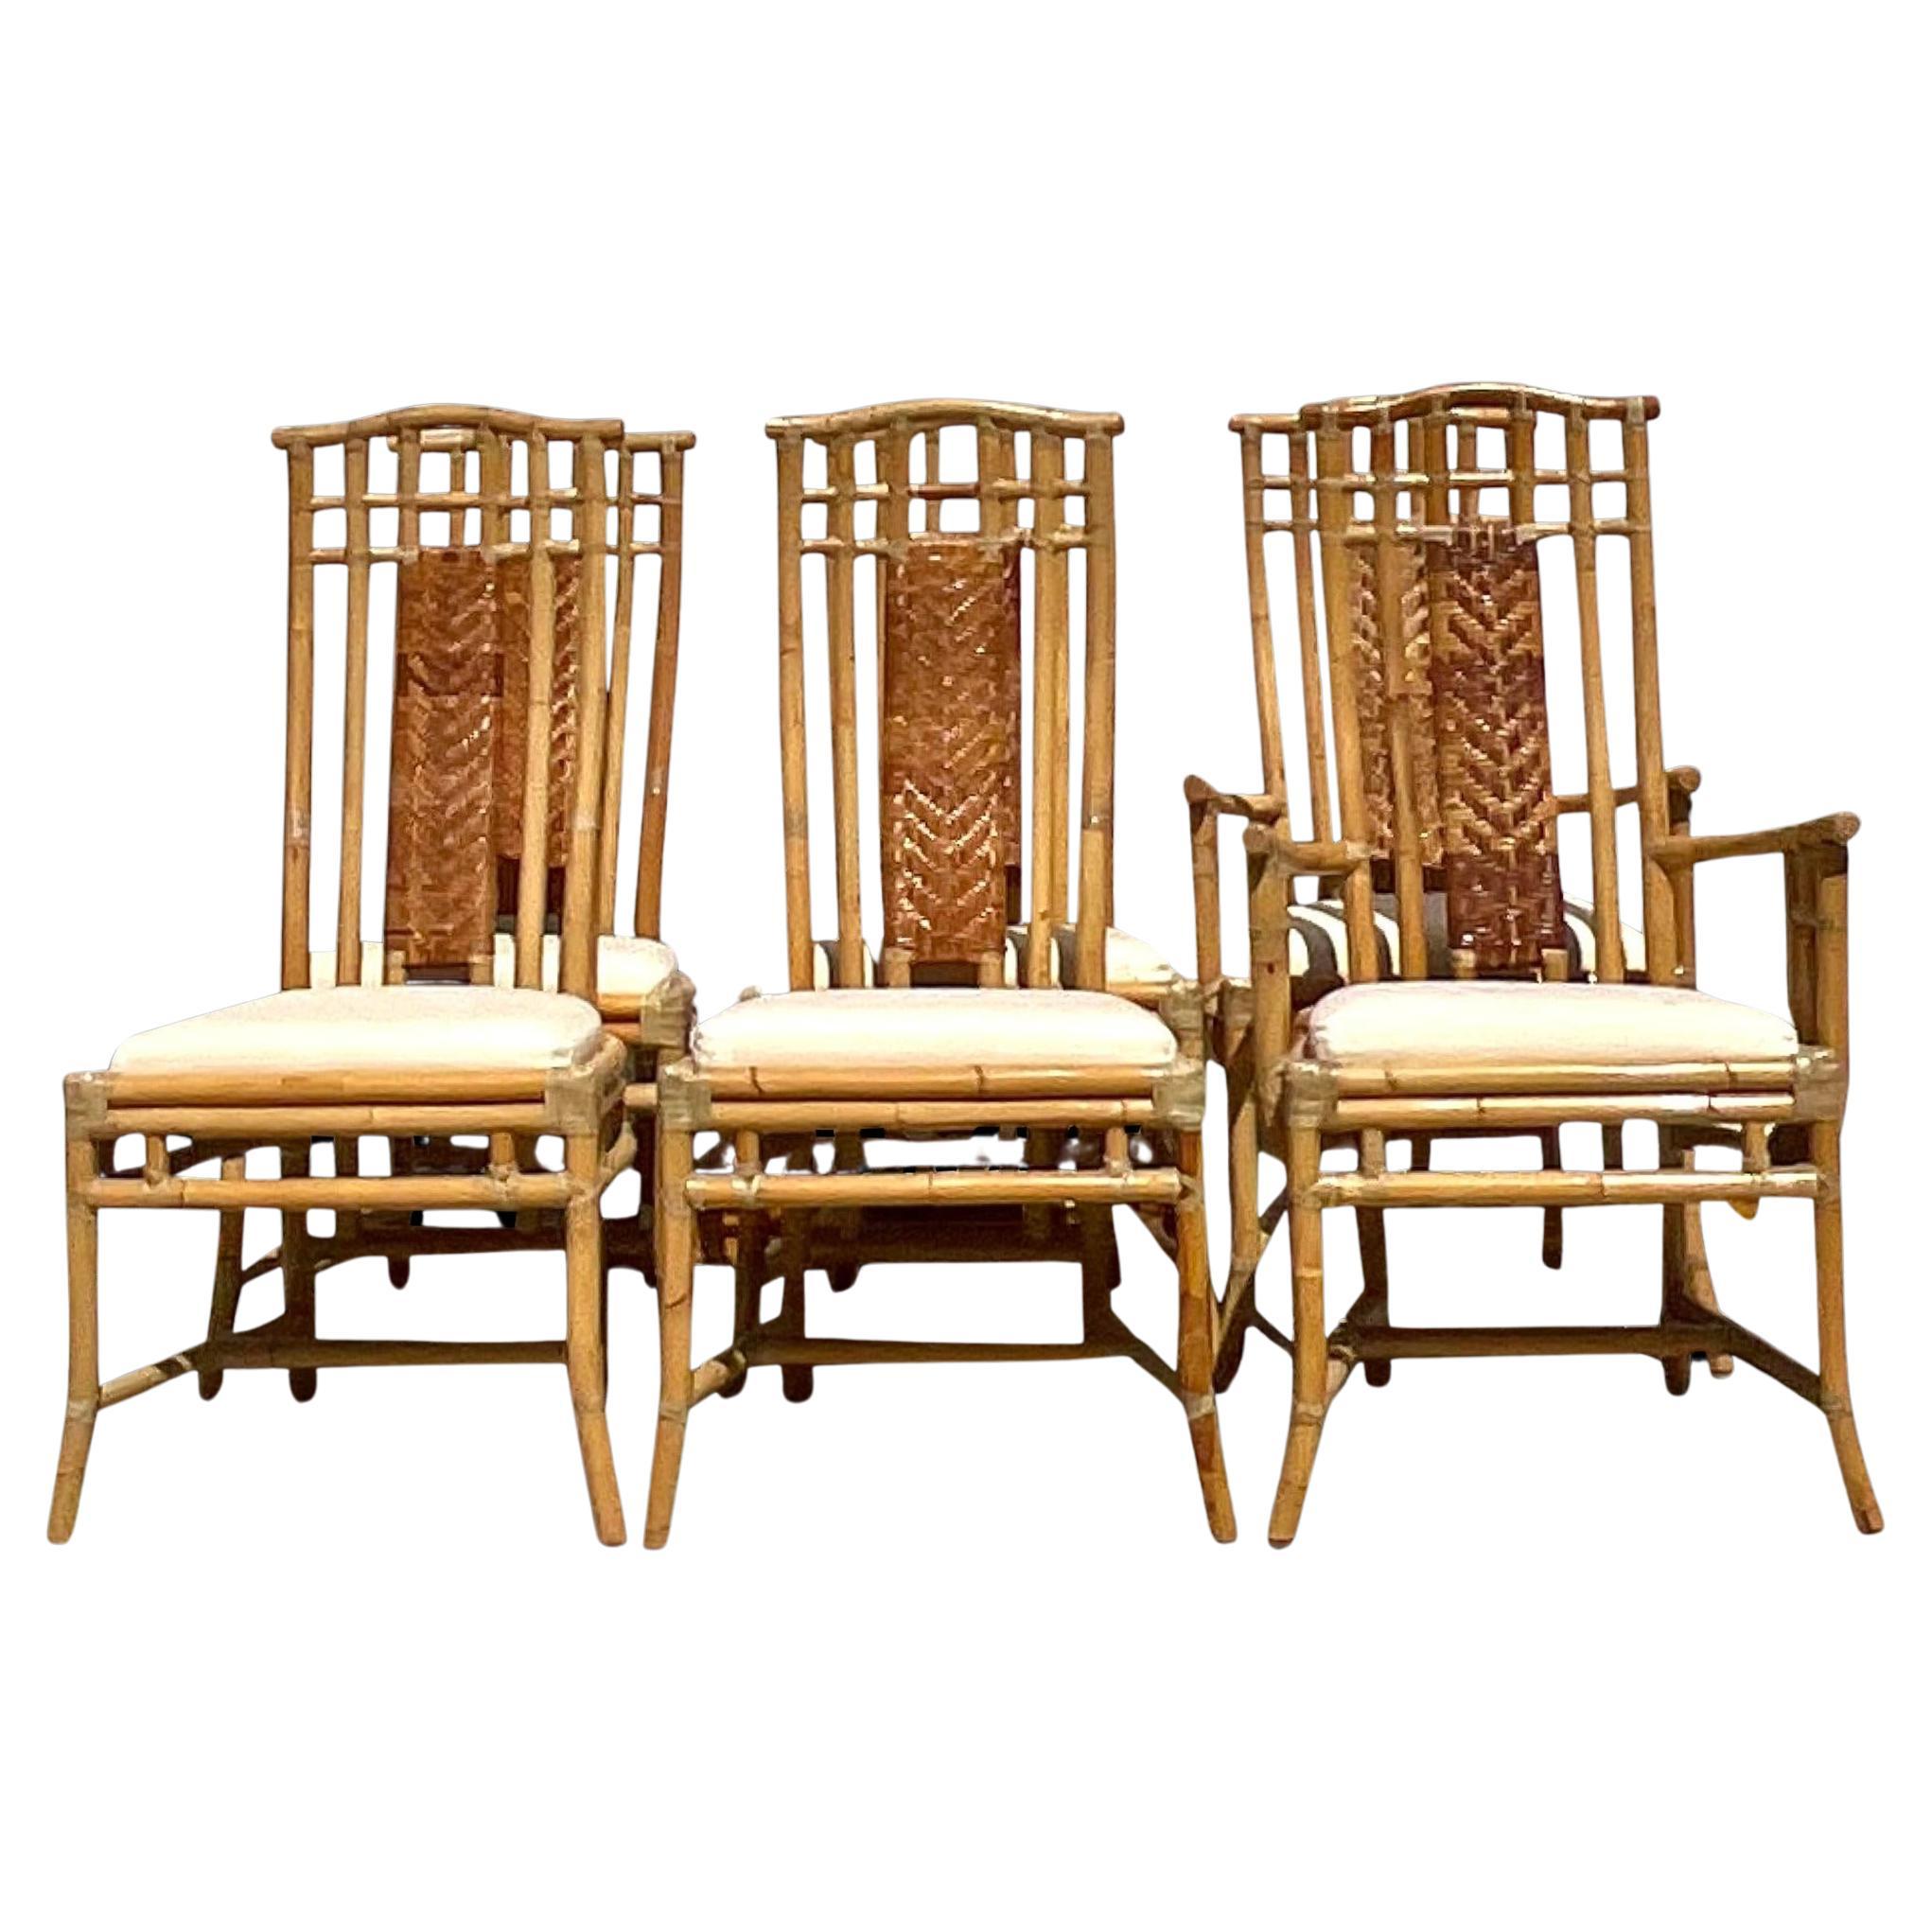 Vintage Coastal High Back Woven Rattan Chairs - Set of 6 For Sale